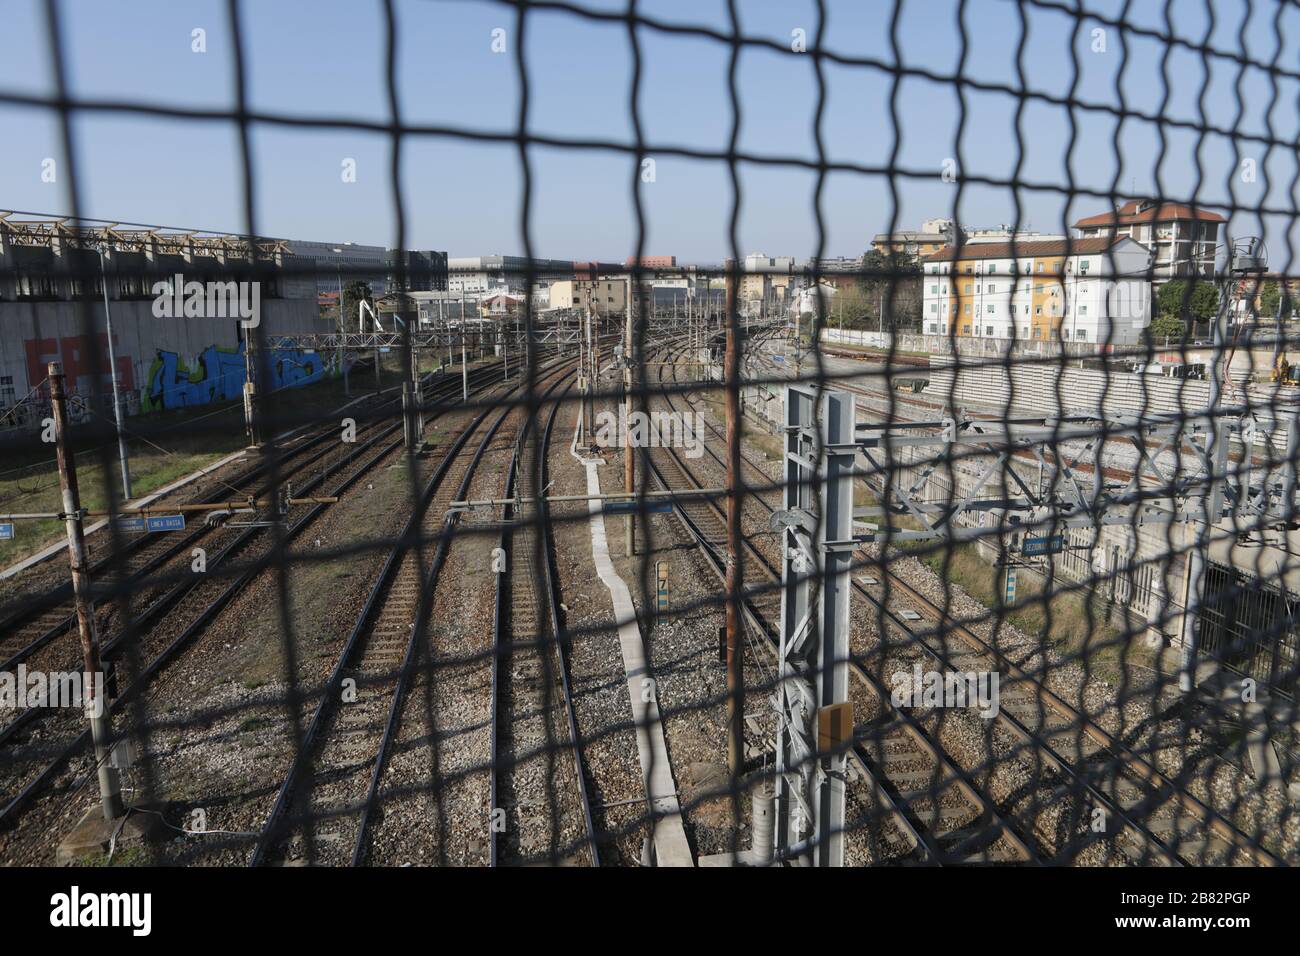 Milan, Italy. 19th Mar, 2020. General view of the Milan railway deserted due to the blockage of traffic on some railway lines on March 19, 2020 in Milan, Italy. Spring blooms in the suburbs as the Italian government continues to enforce the nationwide lockdown measures to control the spread of COVID-19. Credit: Mairo Cinquetti/Alamy Live News Stock Photo